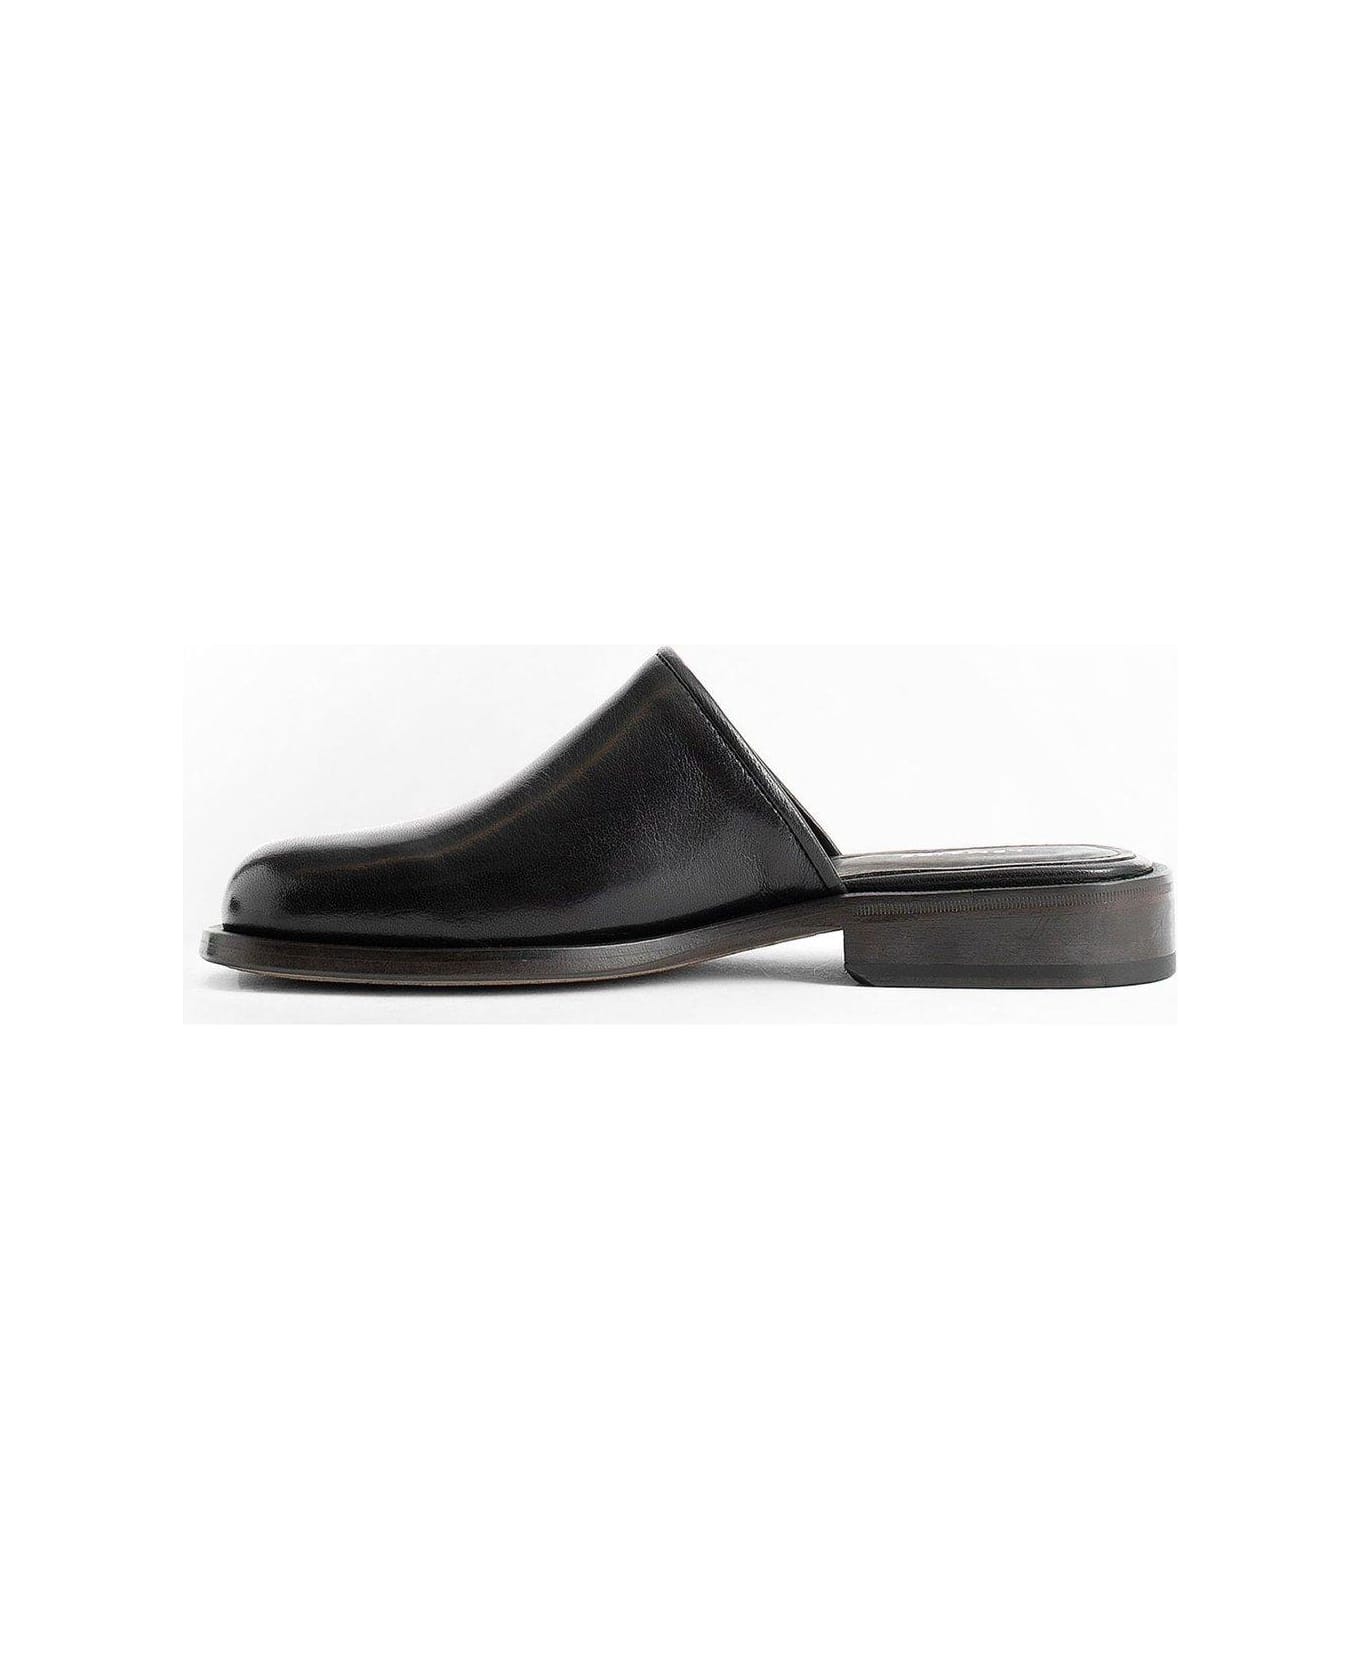 Lemaire Round-toe Slip-on Mules - Black その他各種シューズ